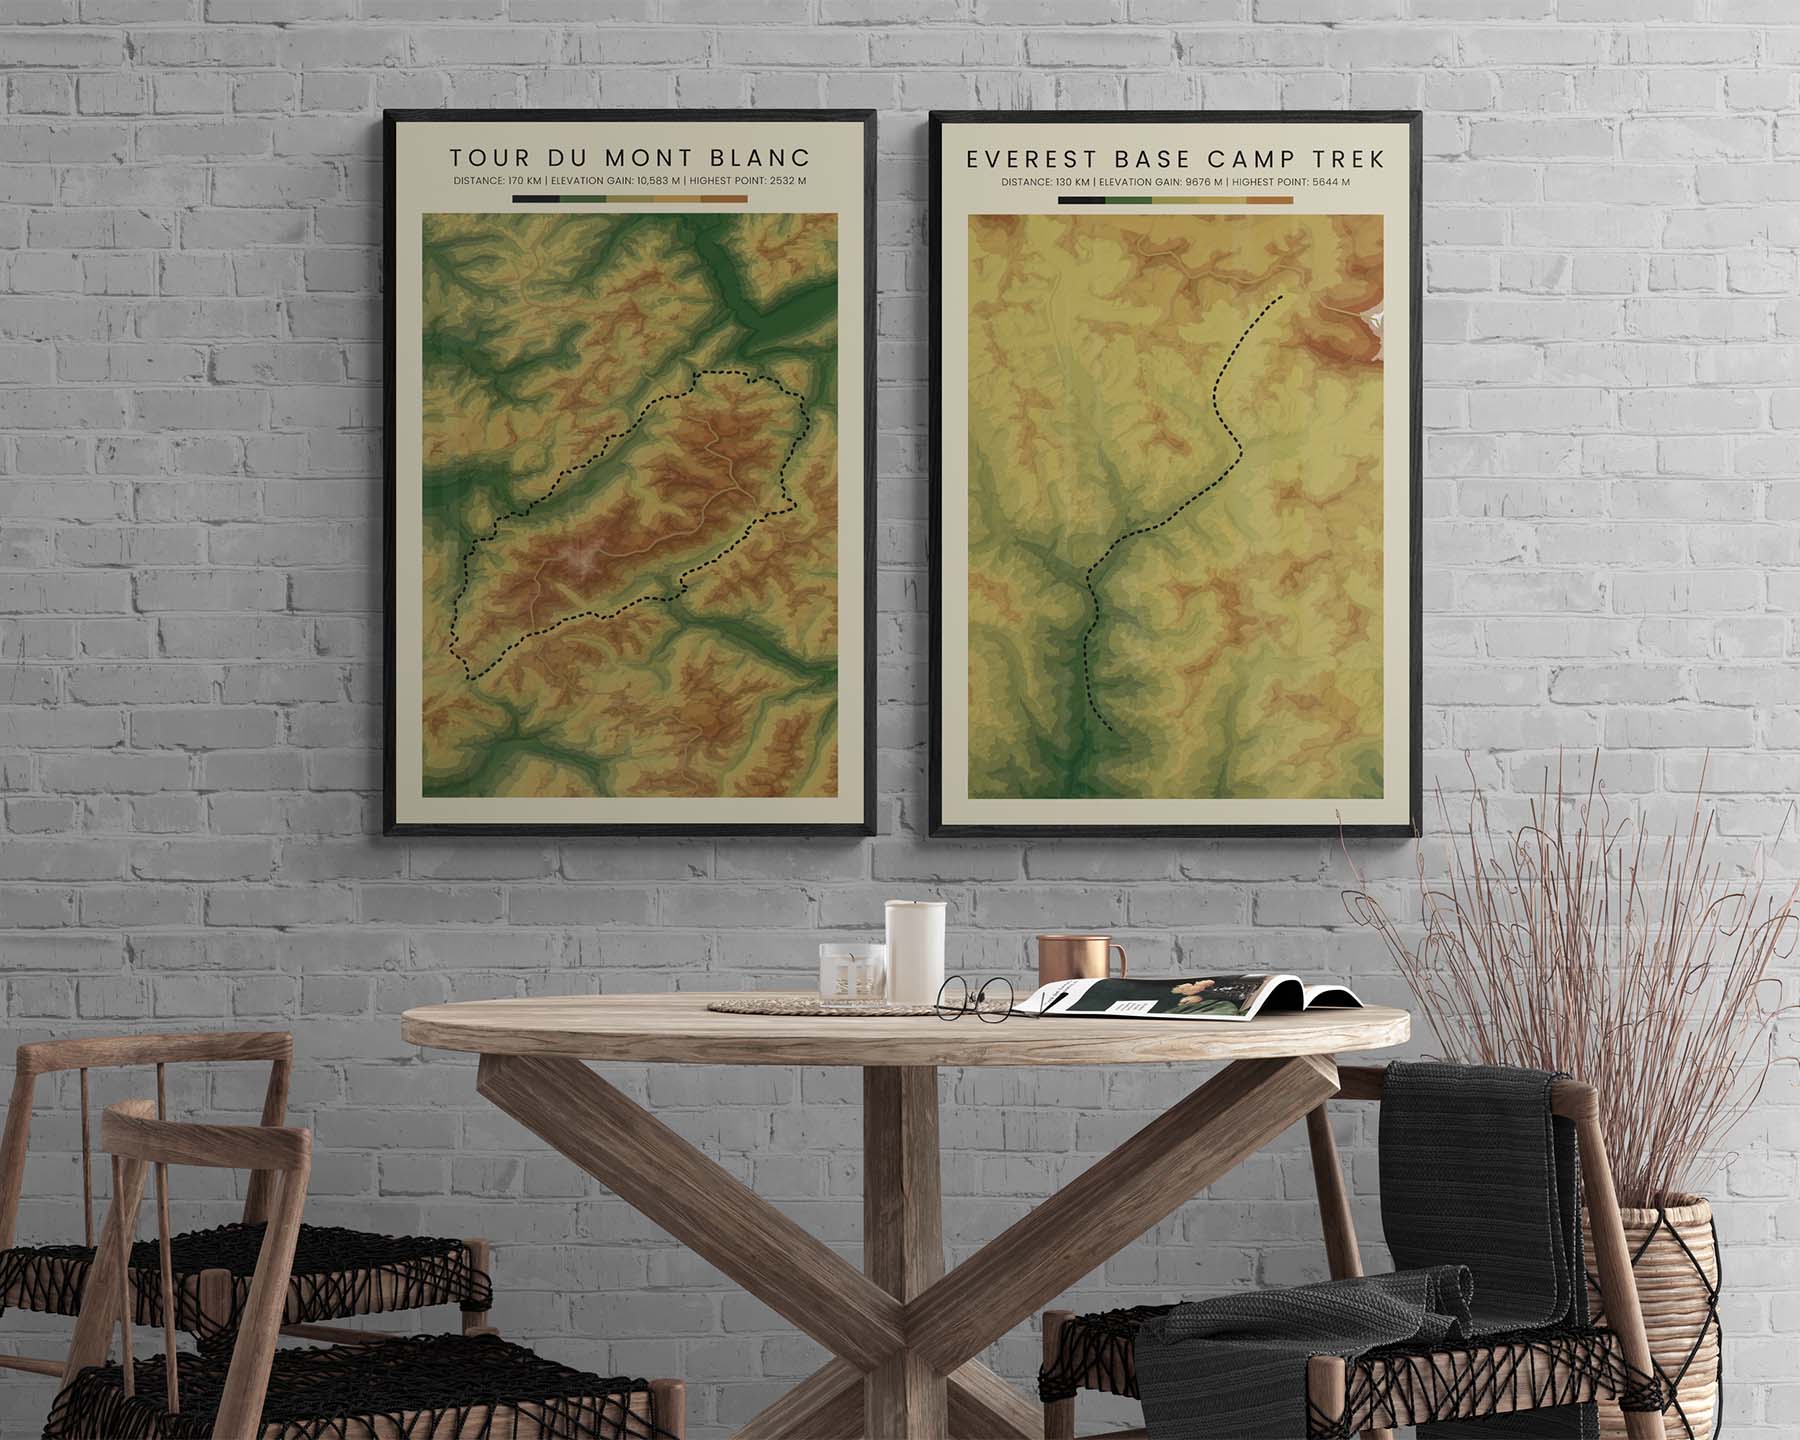 Ultra Tour du Mont Blanc (Alps) Route Poster with Contour Map in Modern Room Decor